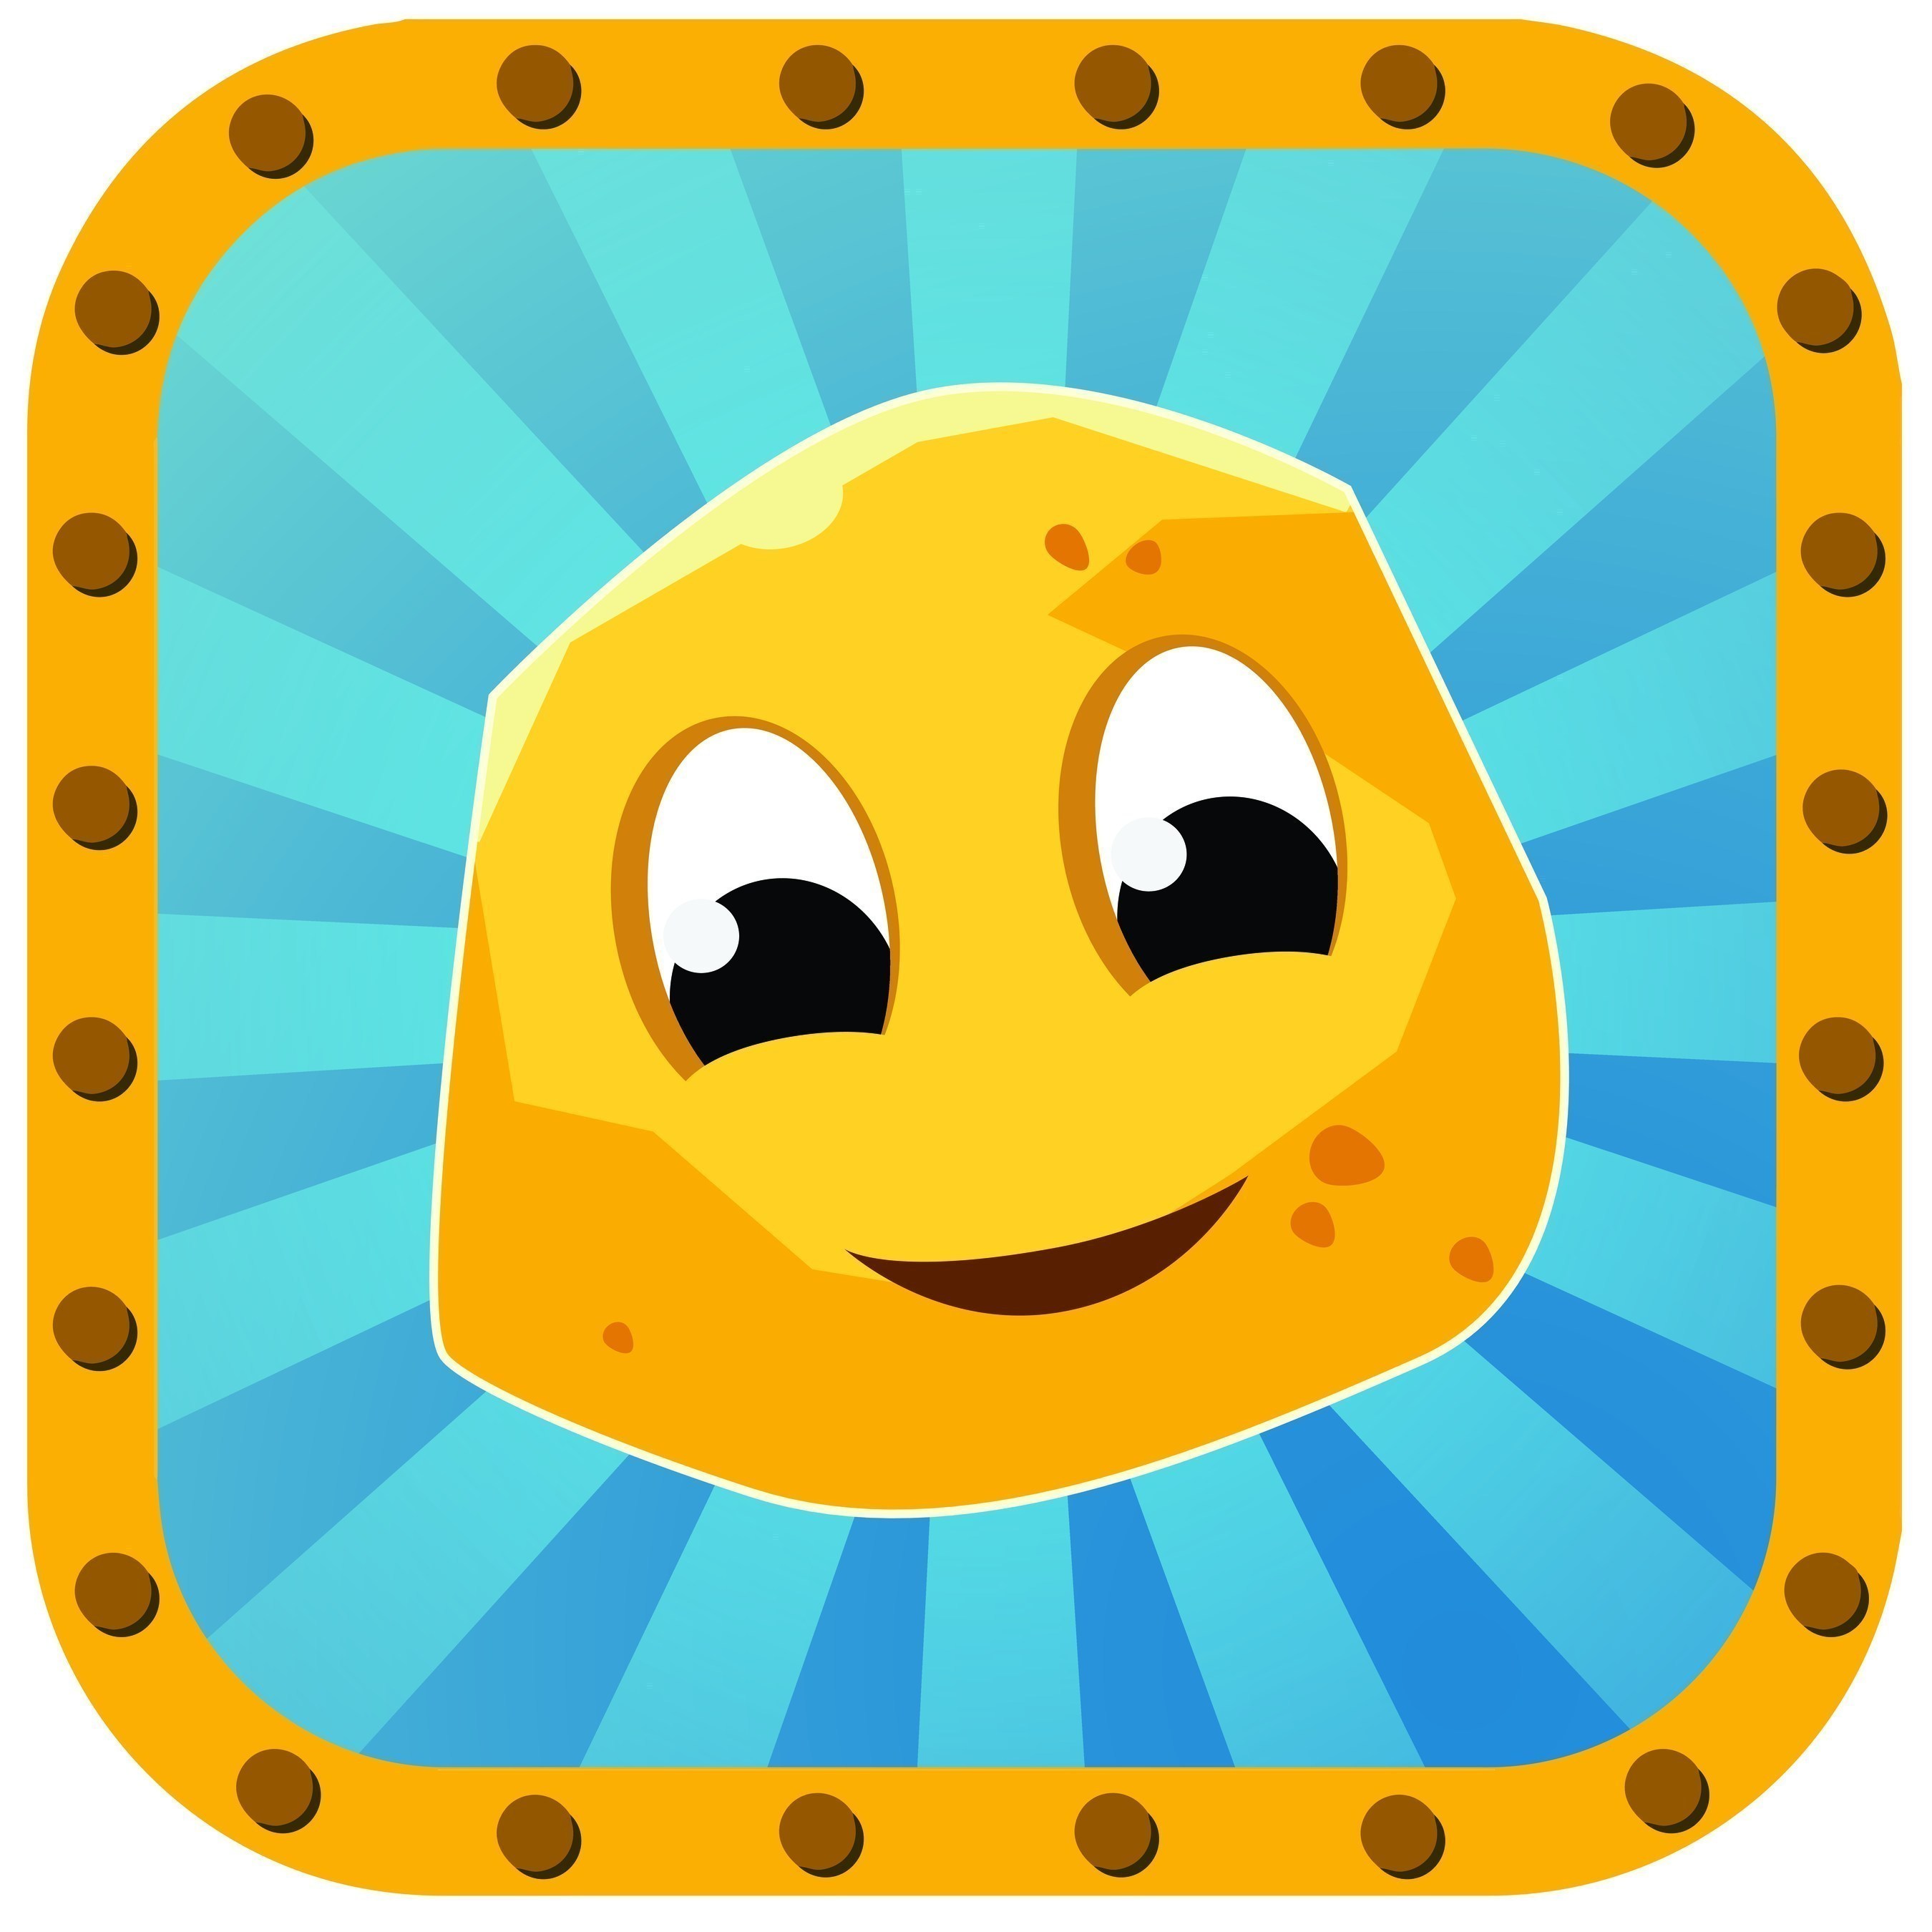 Way to Gold is a strategy-based game for fun. Download from Google Play or Apple's App Store